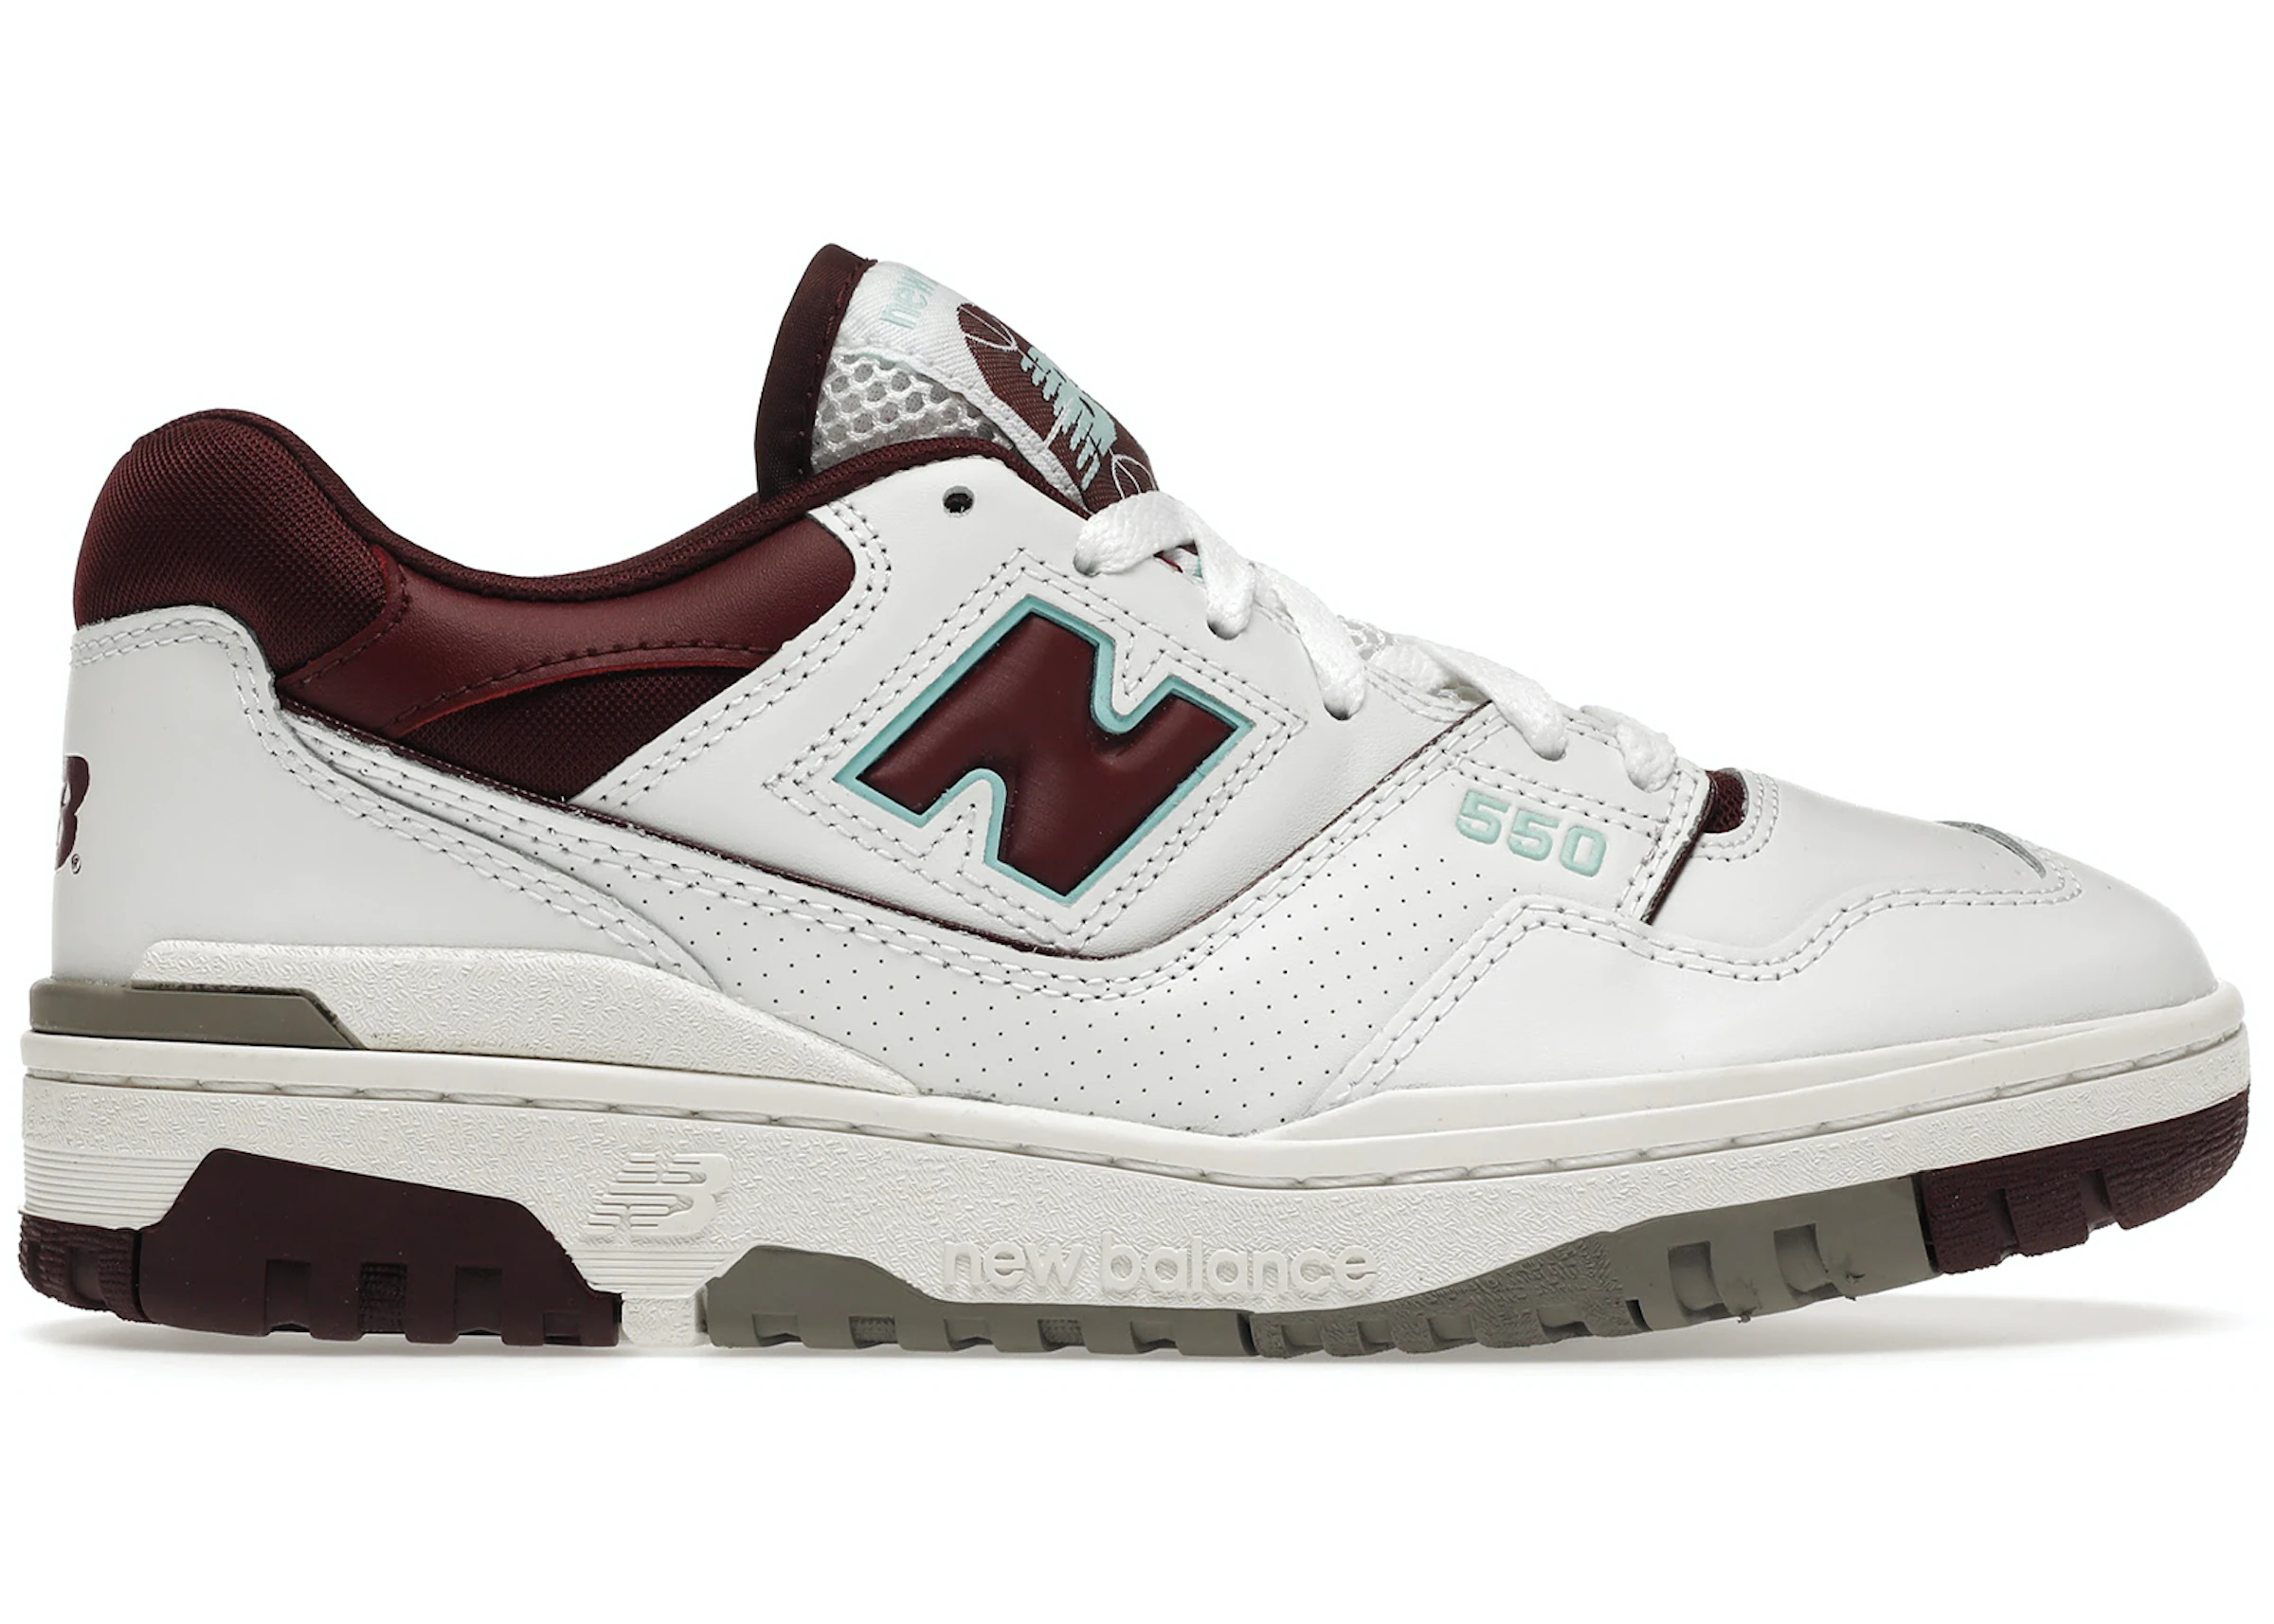 Absence lottery Necklet Buy New Balance Shoes & New Sneakers - StockX